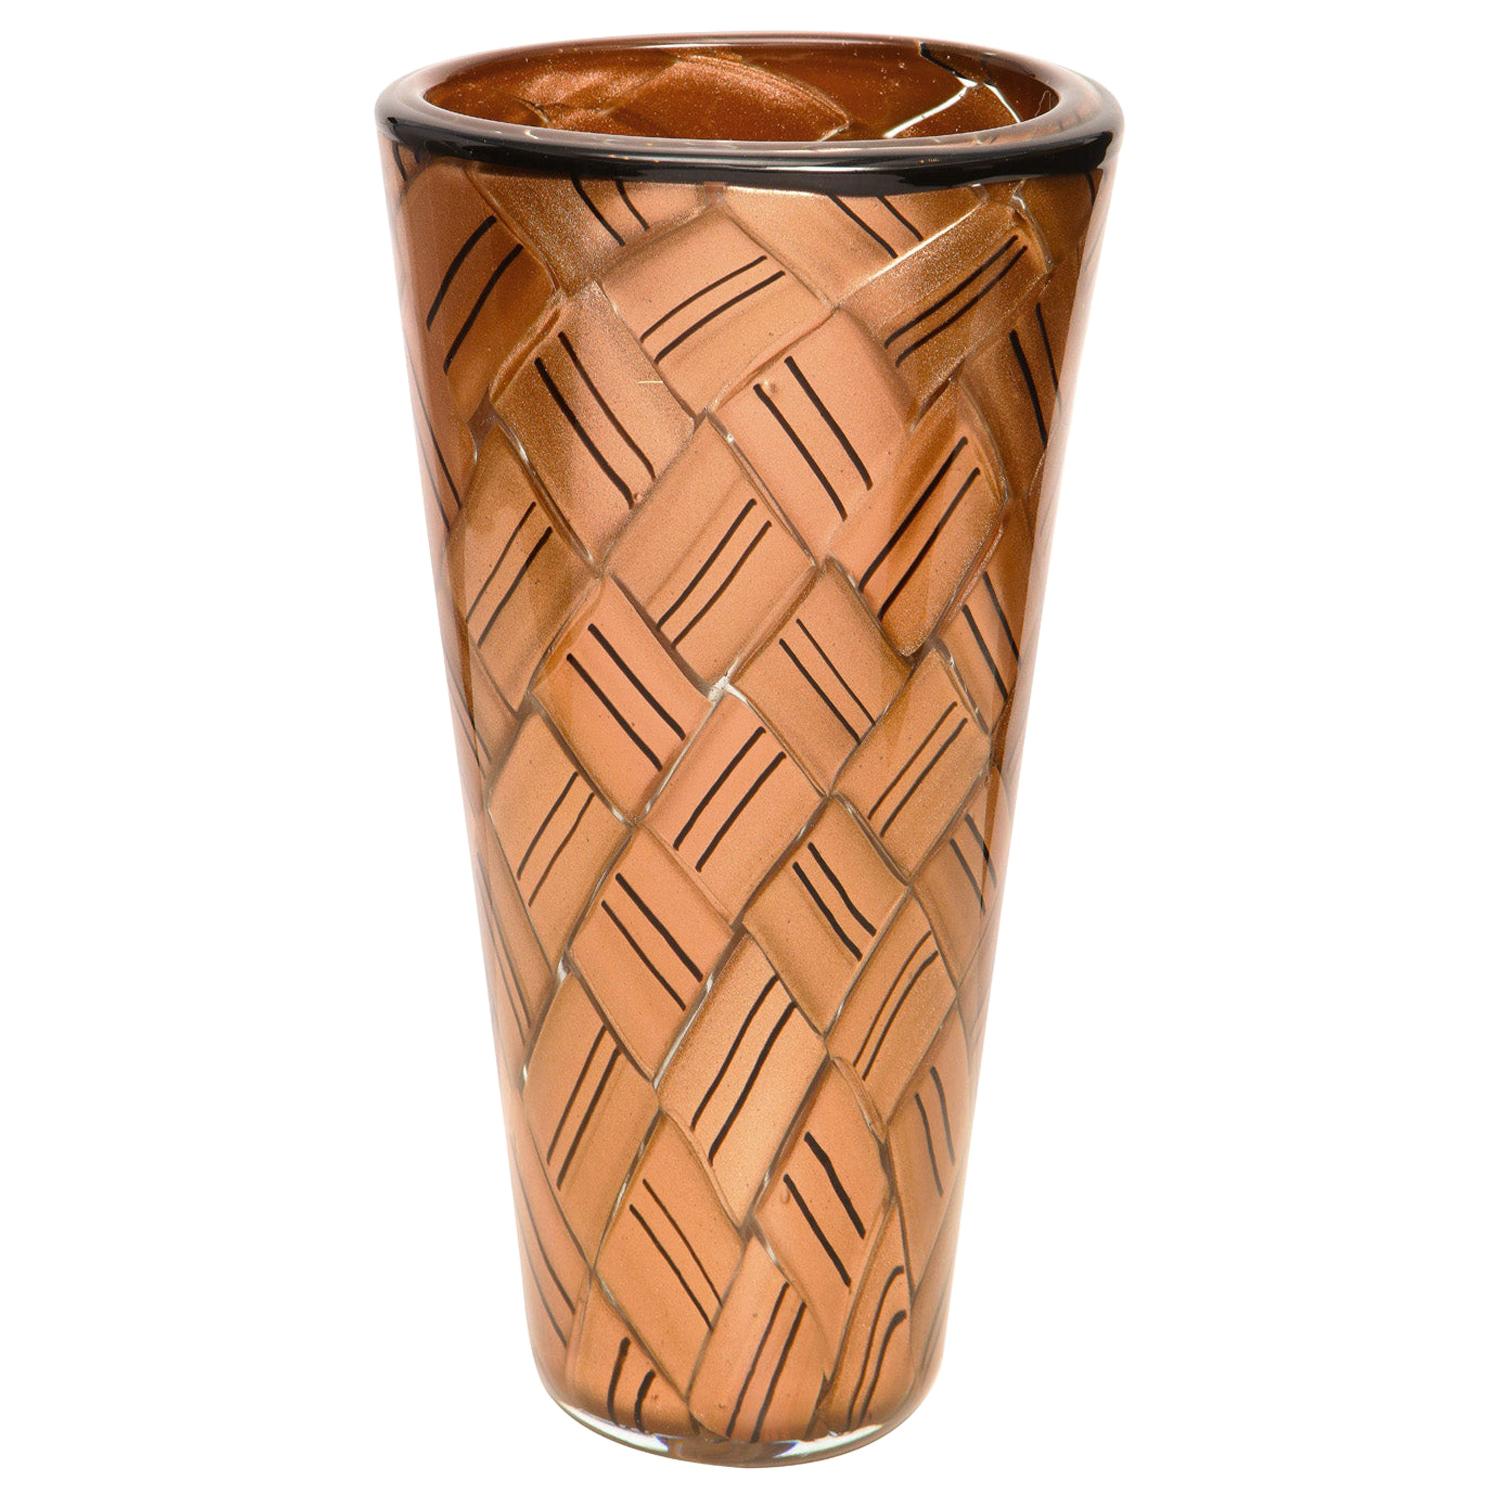 Vittorio Ferro Vase with "Alterni" Pattern 2002 (Signed and Dated) For Sale